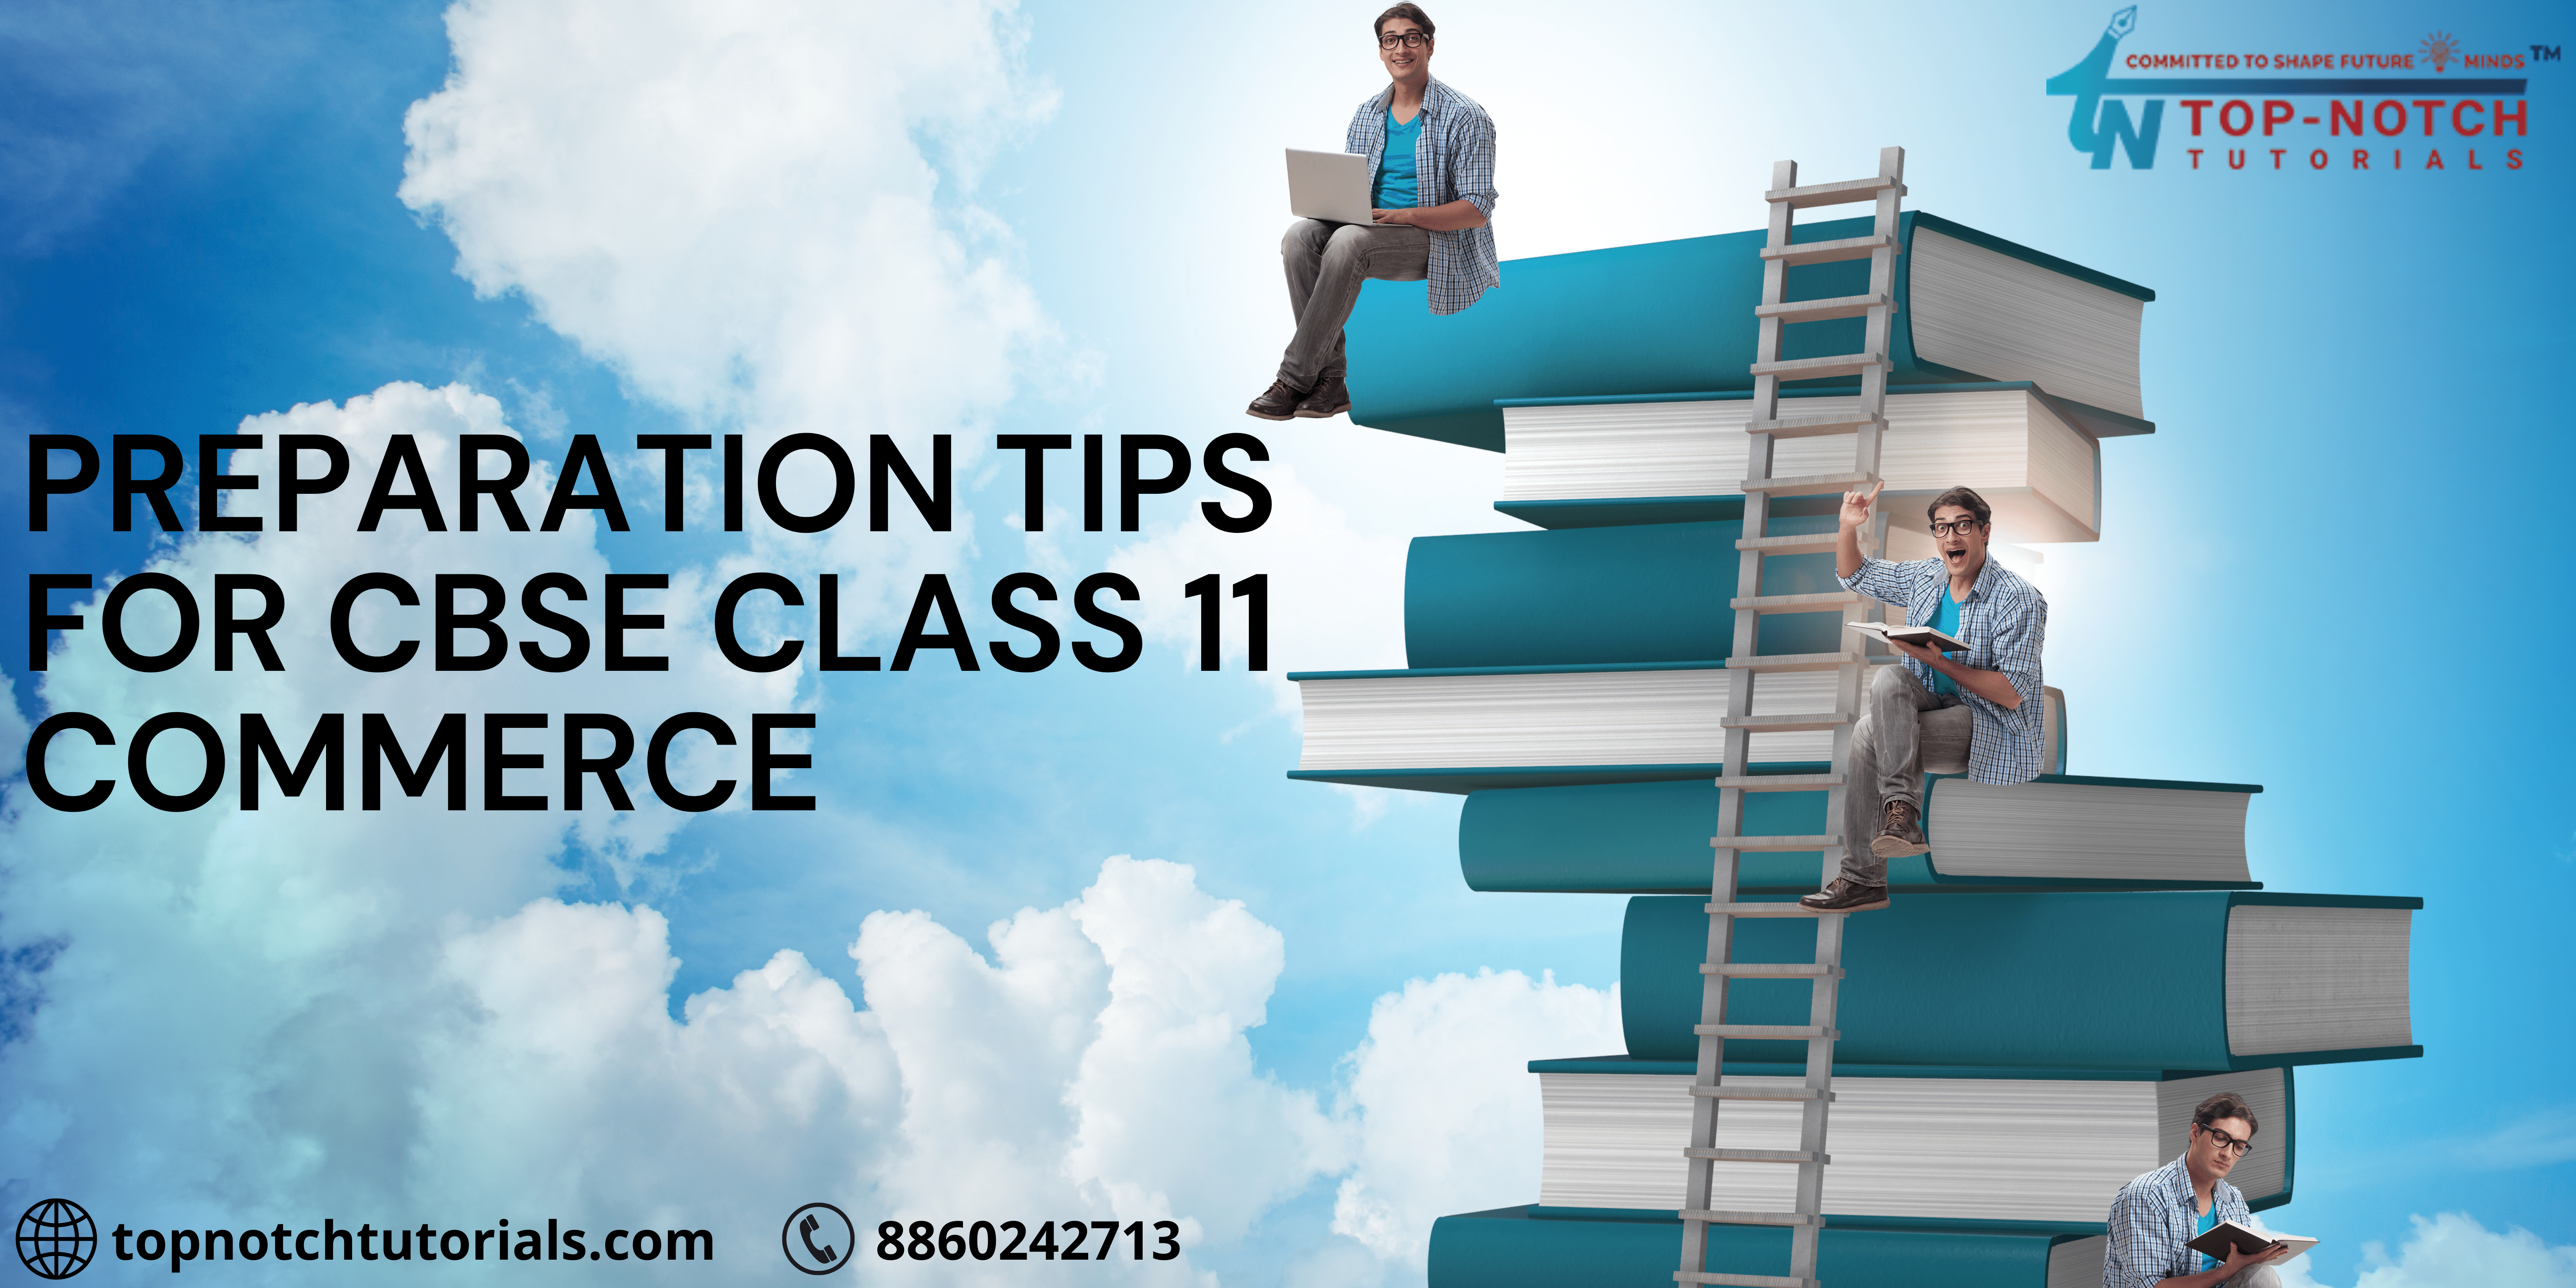 Preparation Tips for CBSE Class 11 Commerce